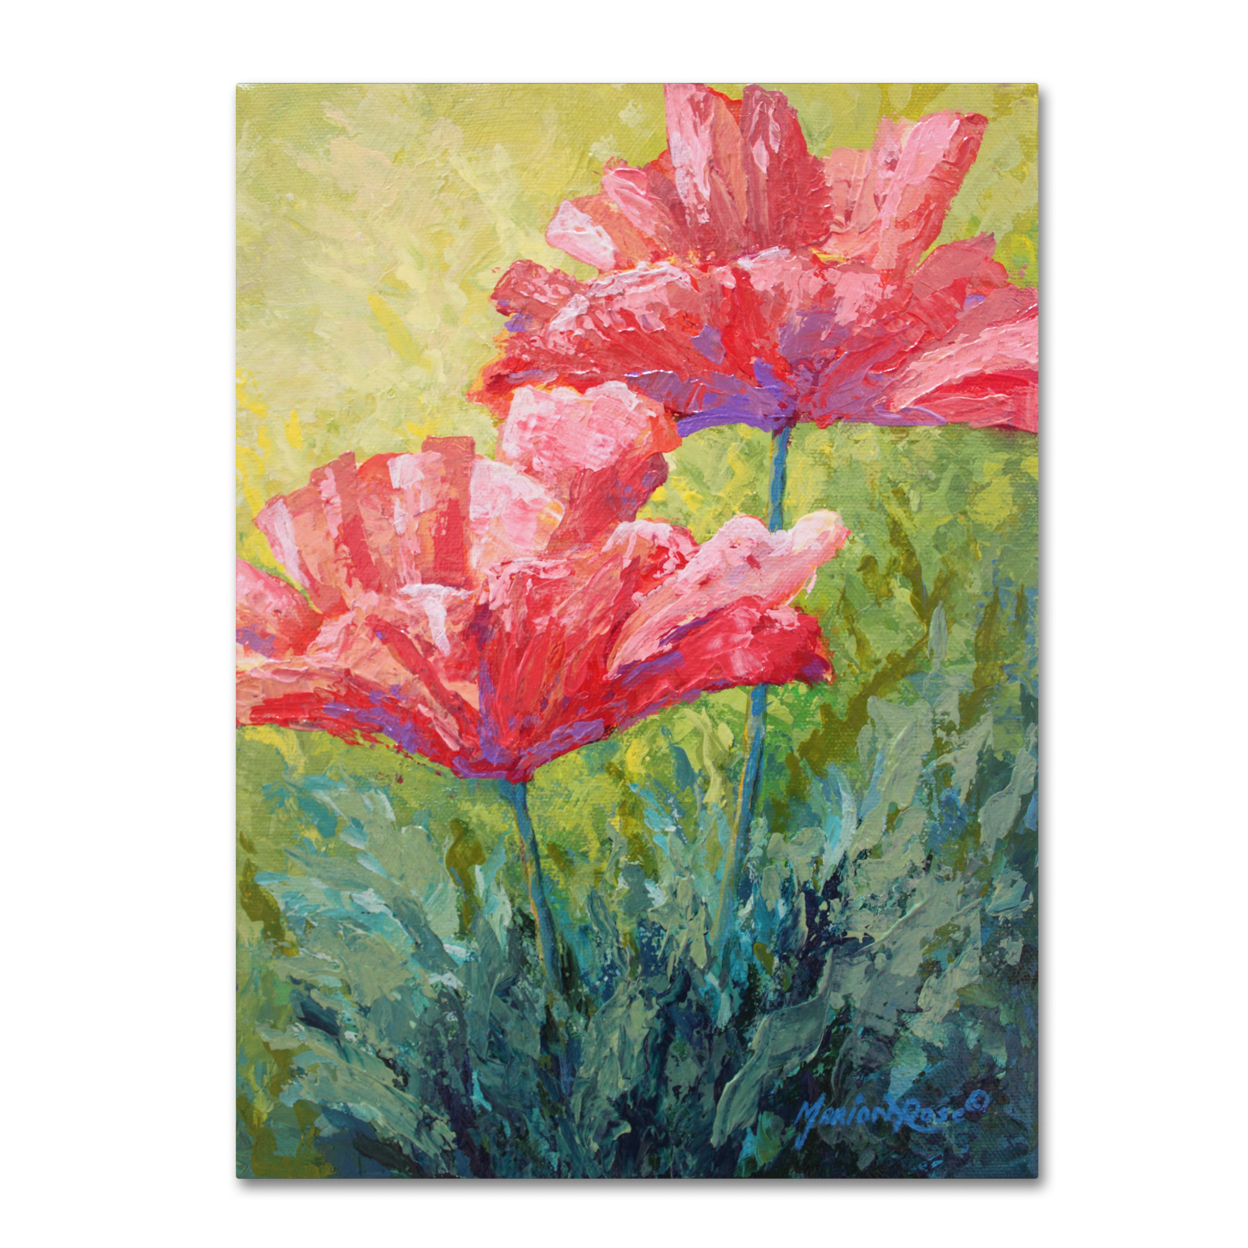 Marion Rose 'Two Red Poppies ' Ready To Hang Canvas Art 14 X 19 Inches Made In USA